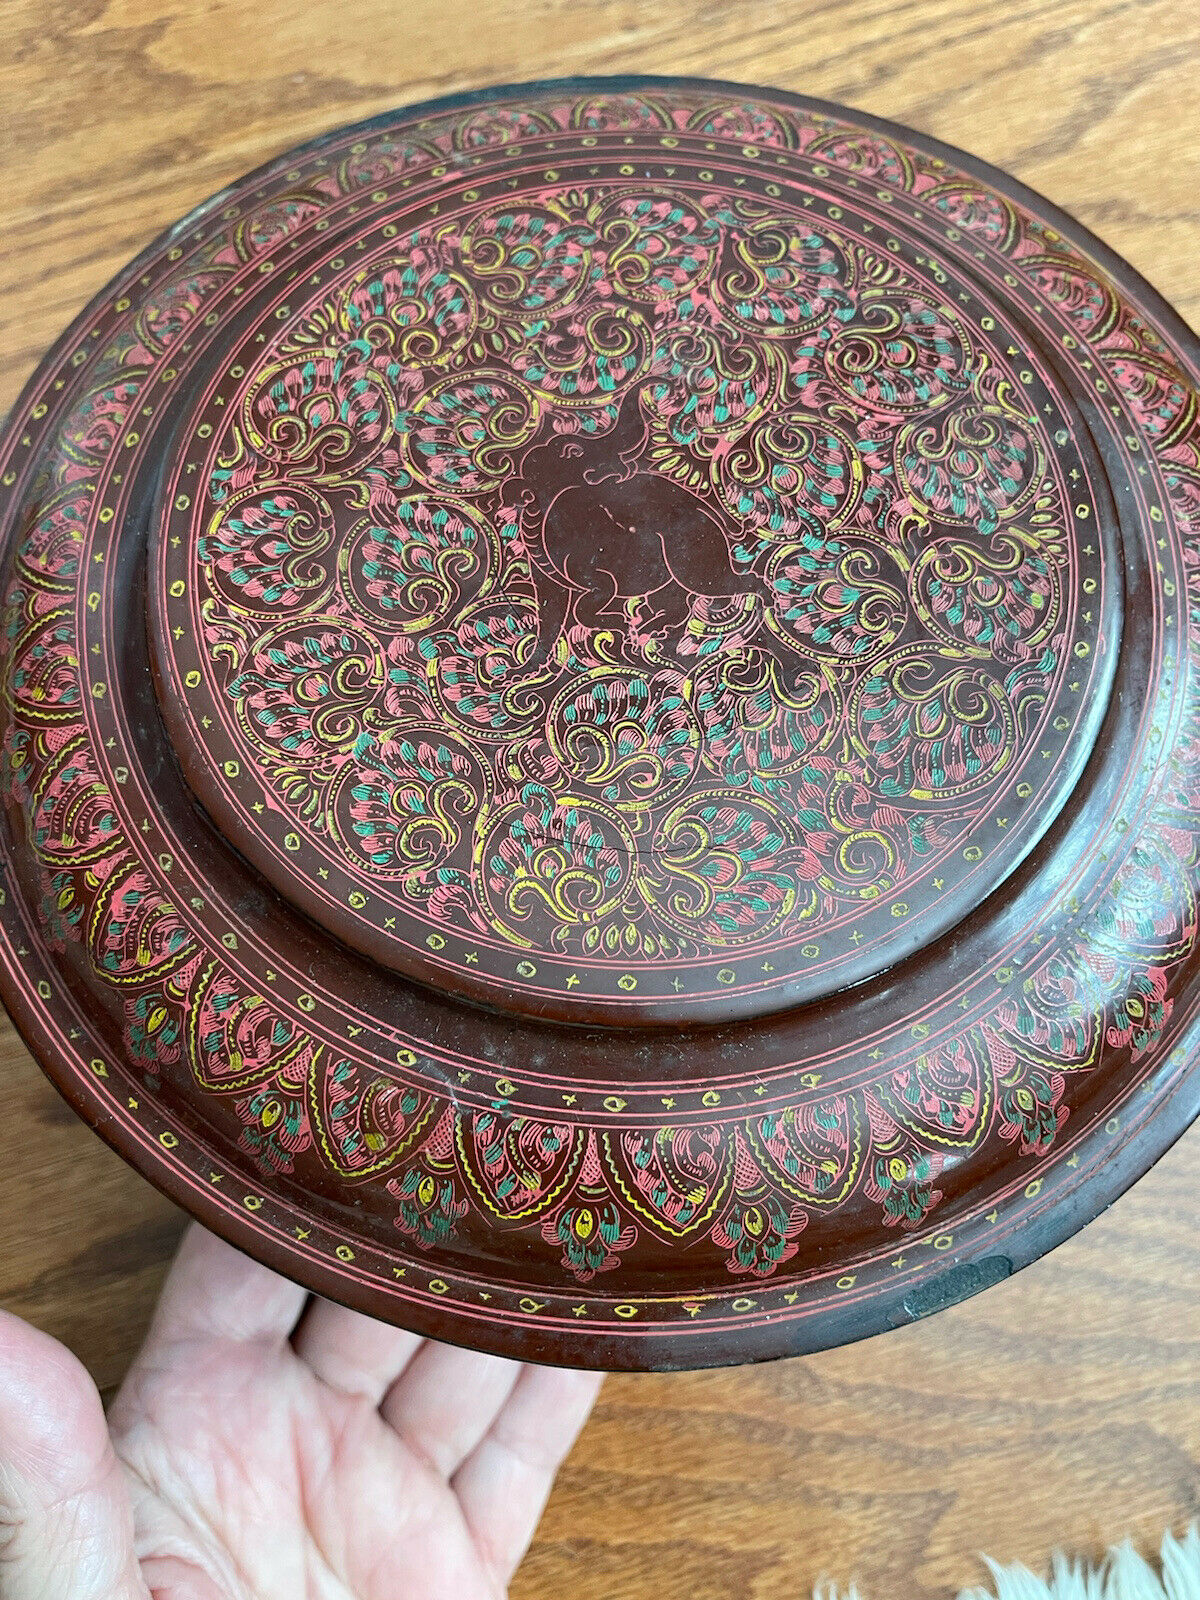 Antique Vintage Burmese Red Lacquer Box Container Burma Se Asian Old